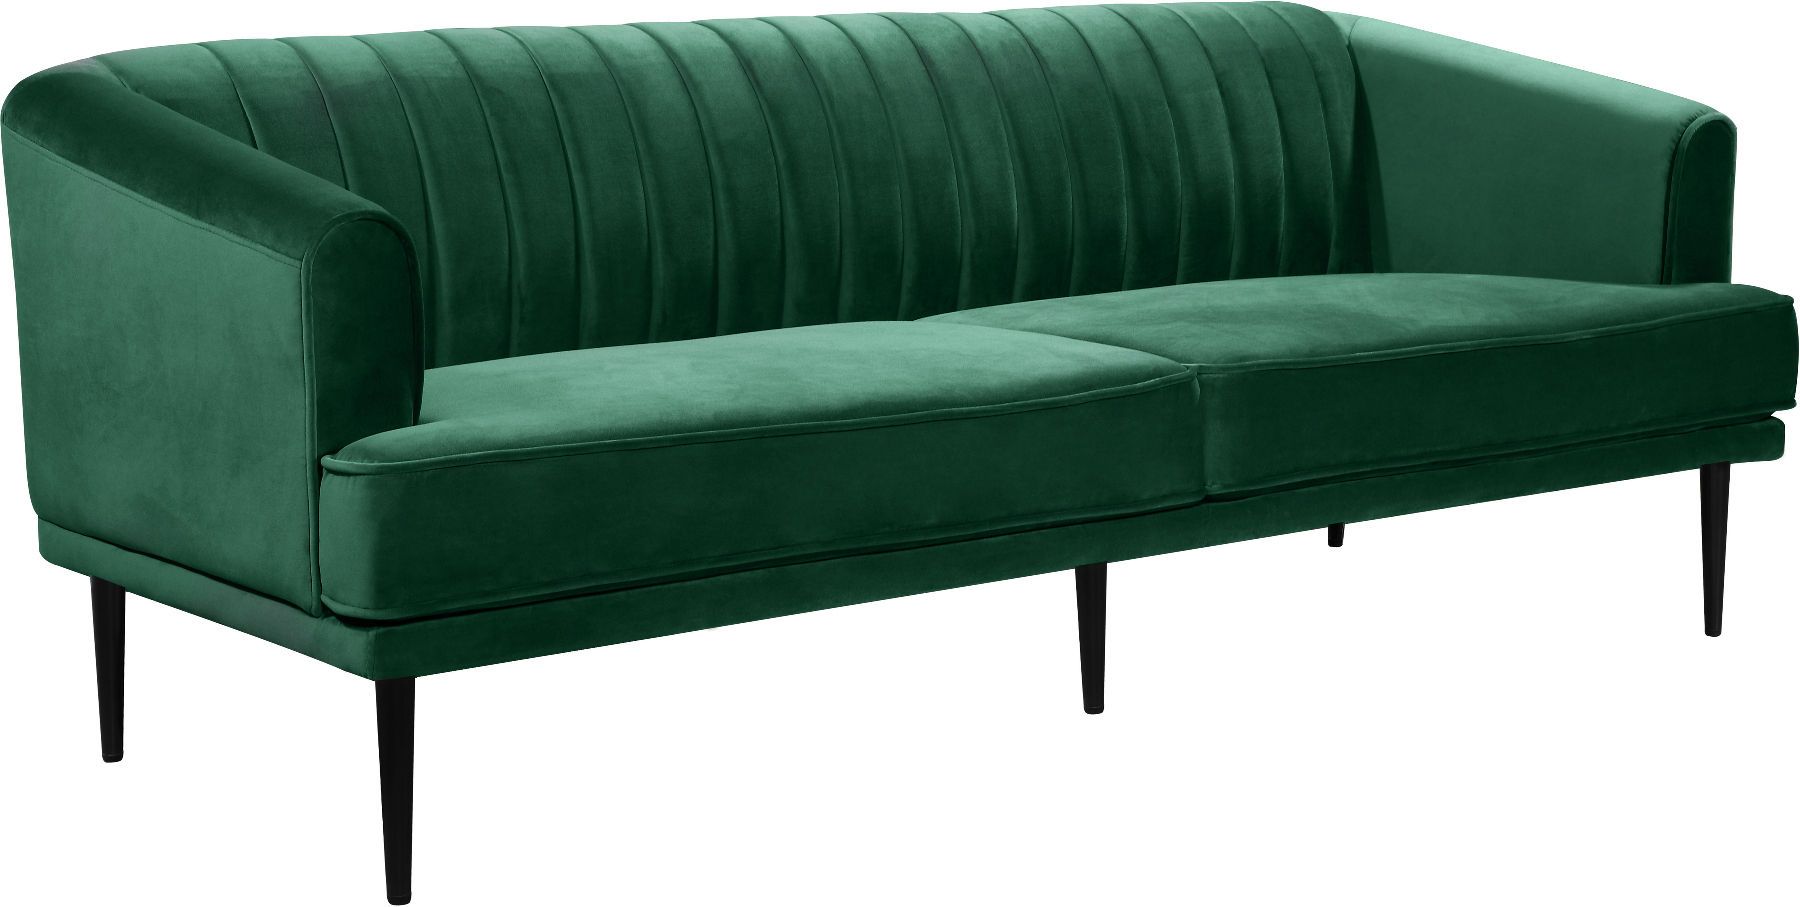 The Ultimate Guide to Choosing the
Perfect Rory Sofa Chair for Your Living Room